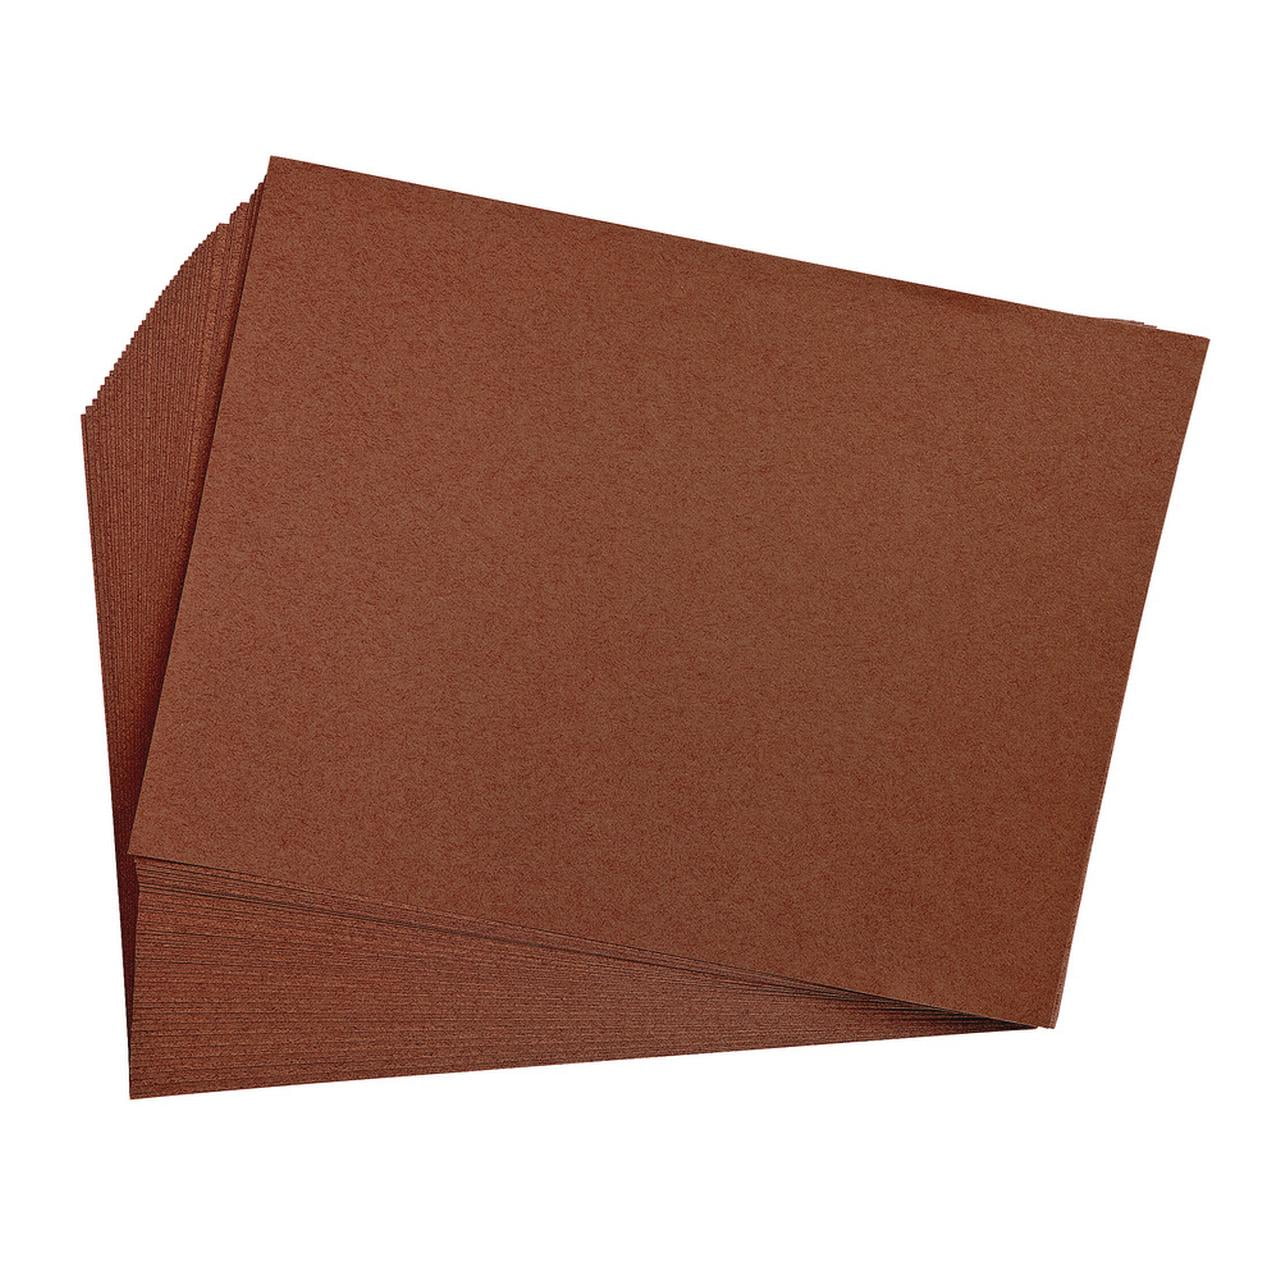 Dark Brown Construction Paper Heavyweight Construction Paper All Purpose Art Crafts 50 Sheets Painting Kids Art Item # 12CPDK Drawing Paper Art Project Coloring 12 inches x 18 inches